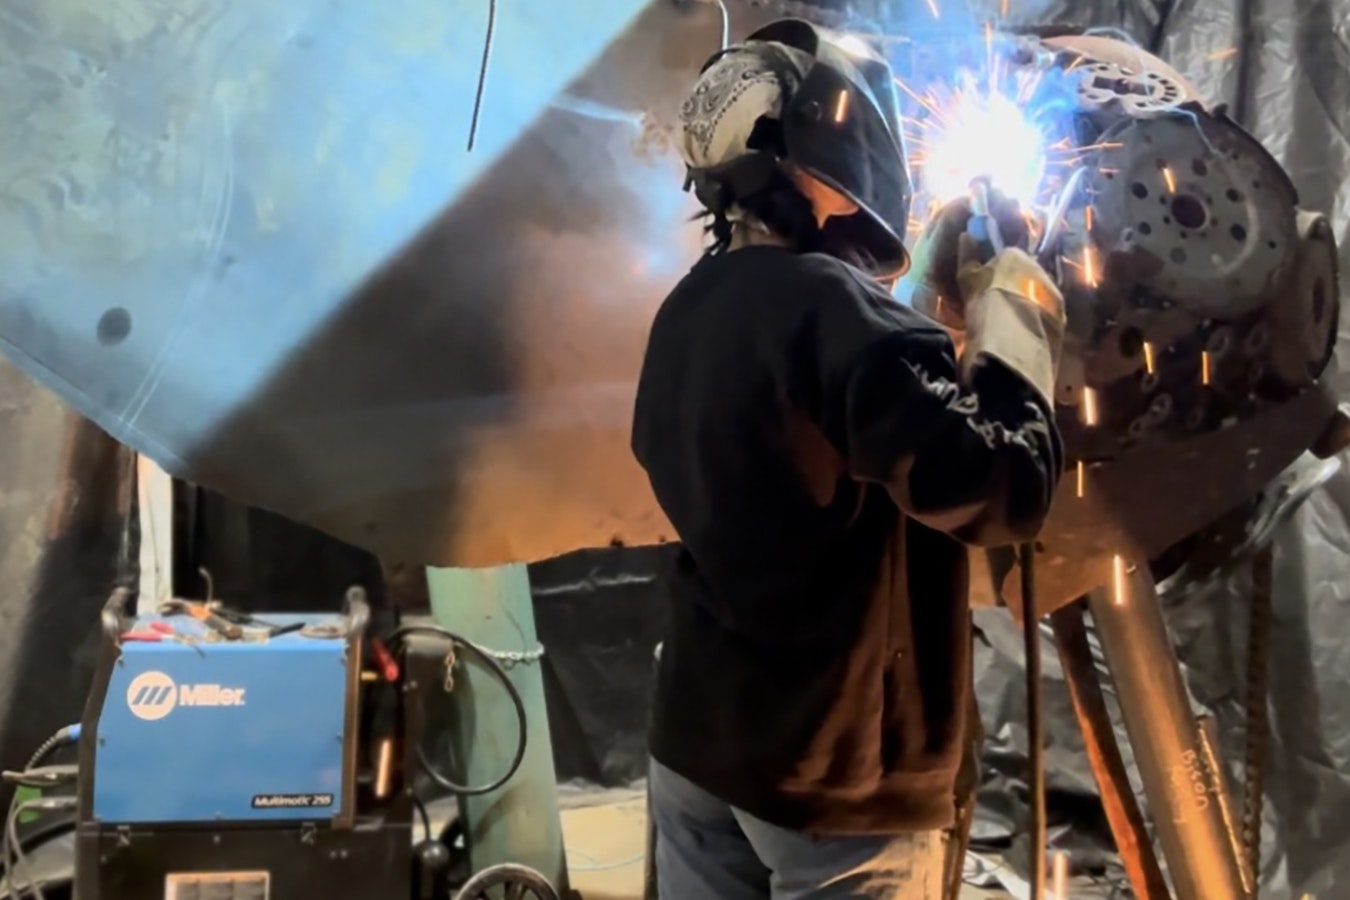 Jade Moser puts her welding talents to use on creating a huge 10-foot, 5,000-pound horse sculpture.